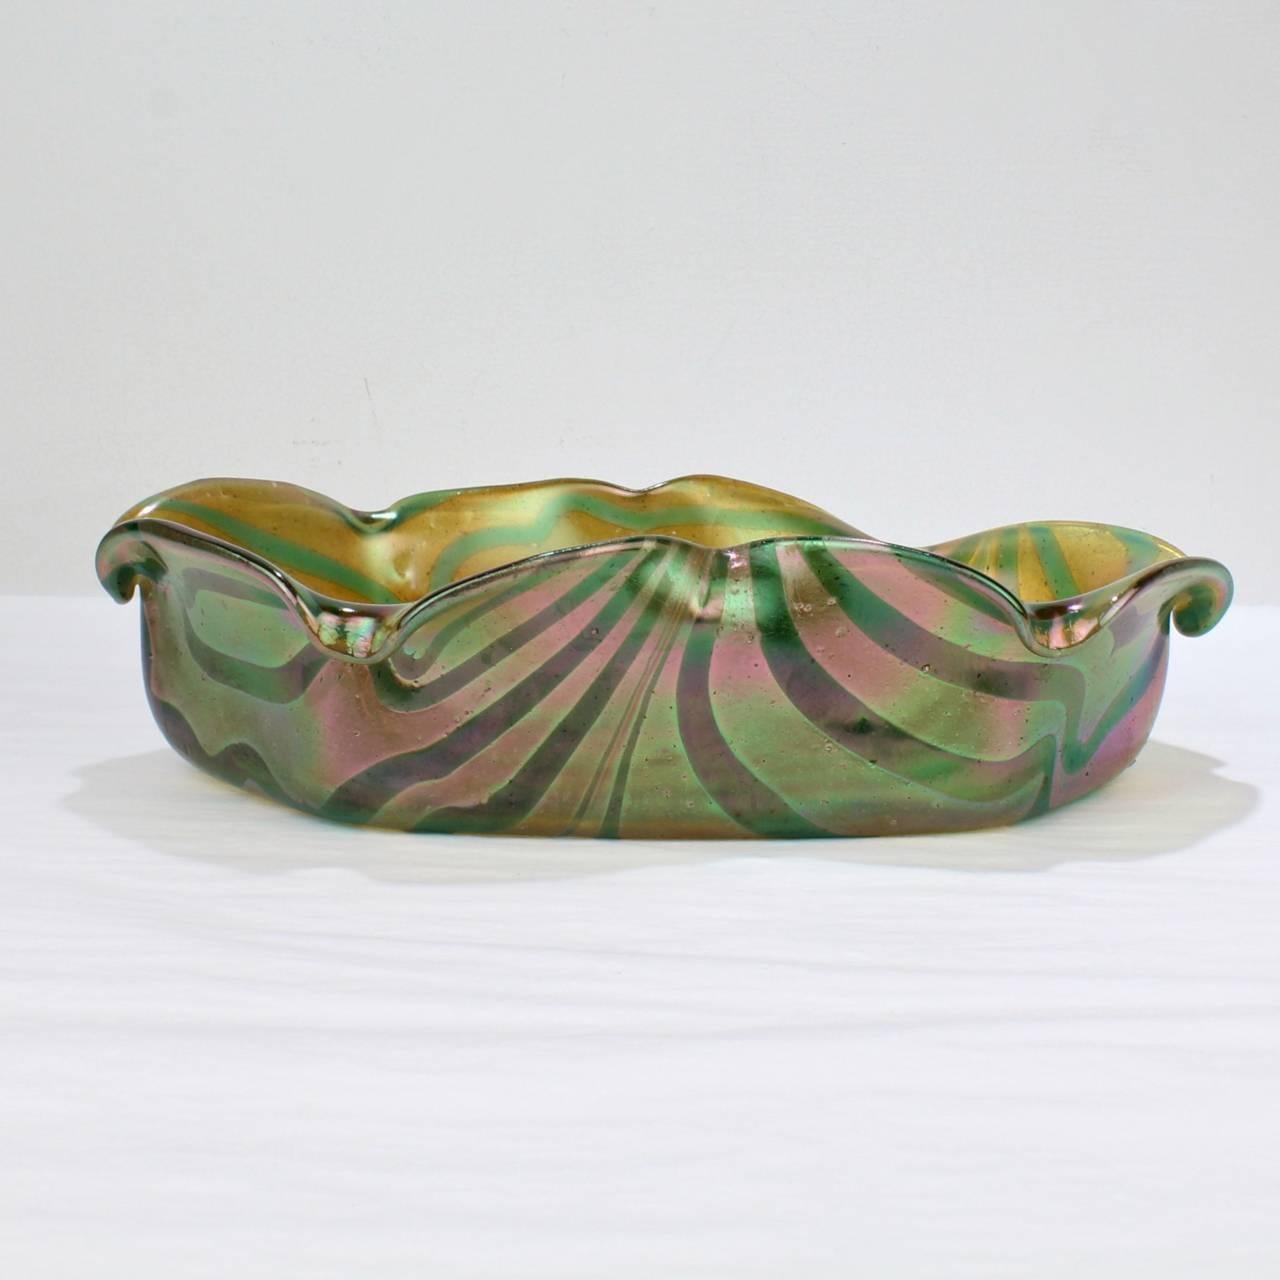 A good Kralik Glassworks Loetz type art glass bowl.

With pulled aqua on gold iridescent finish. 

Kralik Glassworks was among the leaders in European glass making along with Loetz, Moser, Meyr's Neffe, and Lobmeyr at the beginning of the 20th